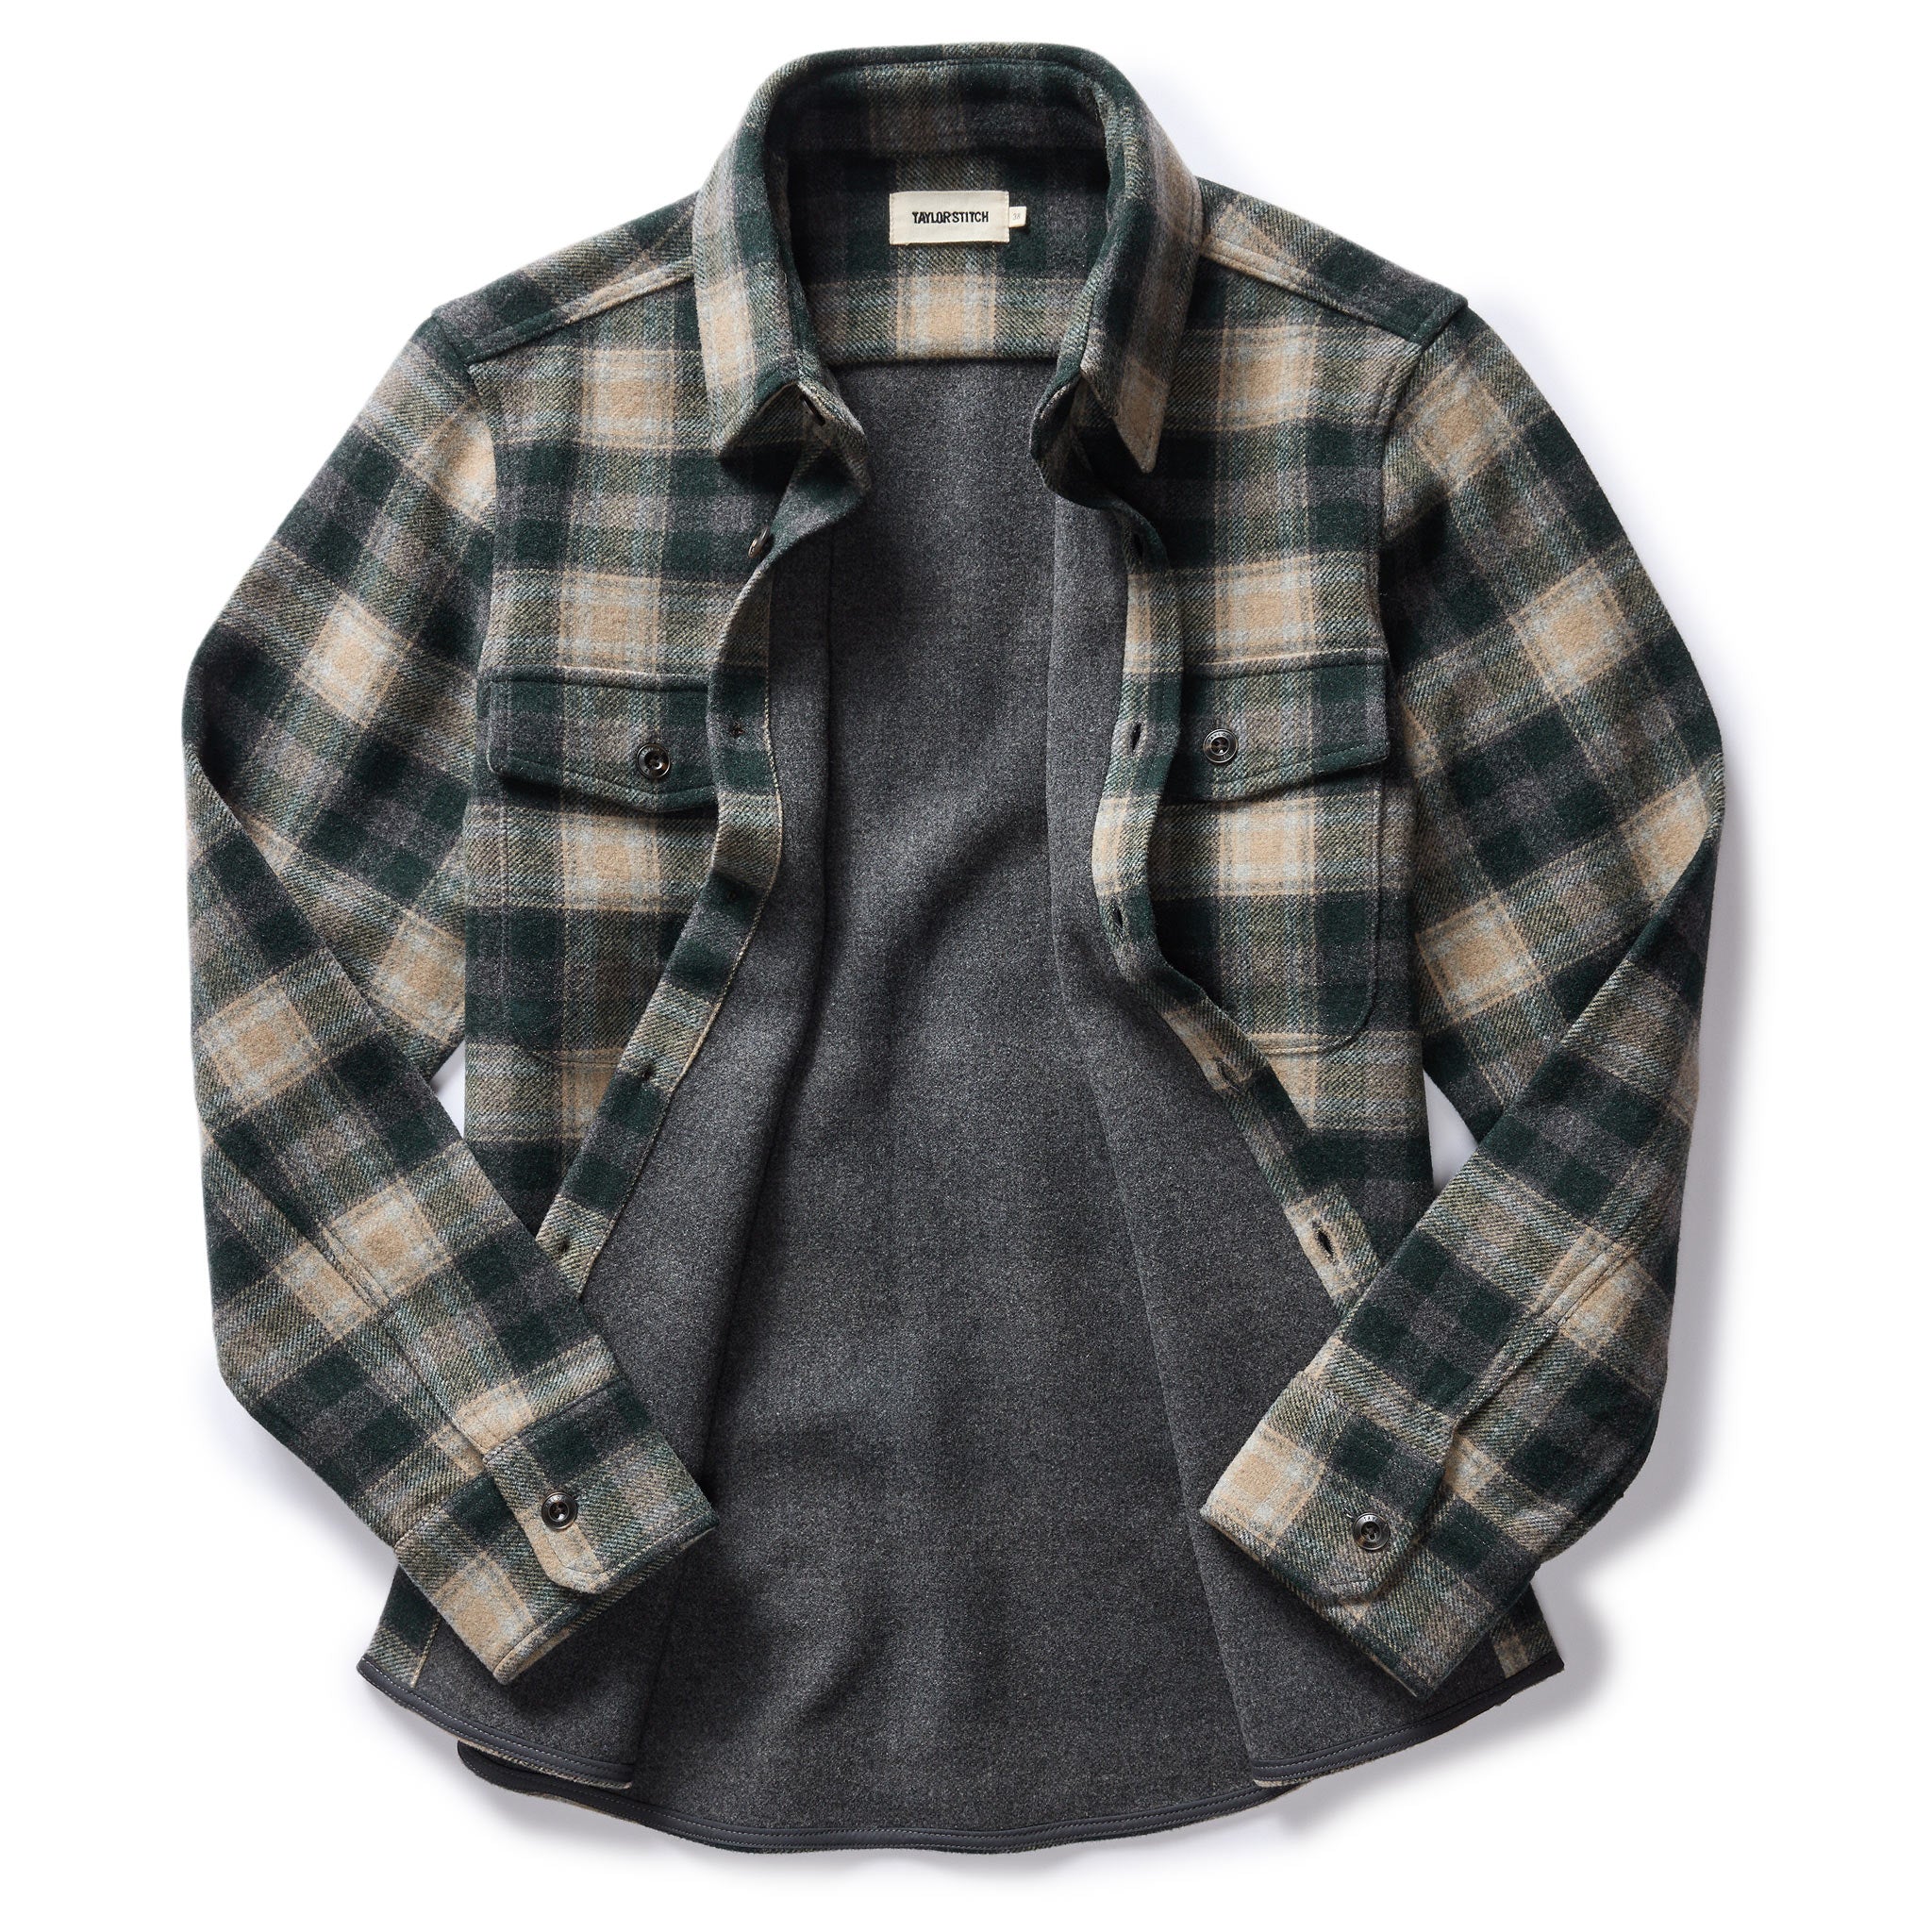 The Maritime Shirt Jacket in Dried Pine Plaid